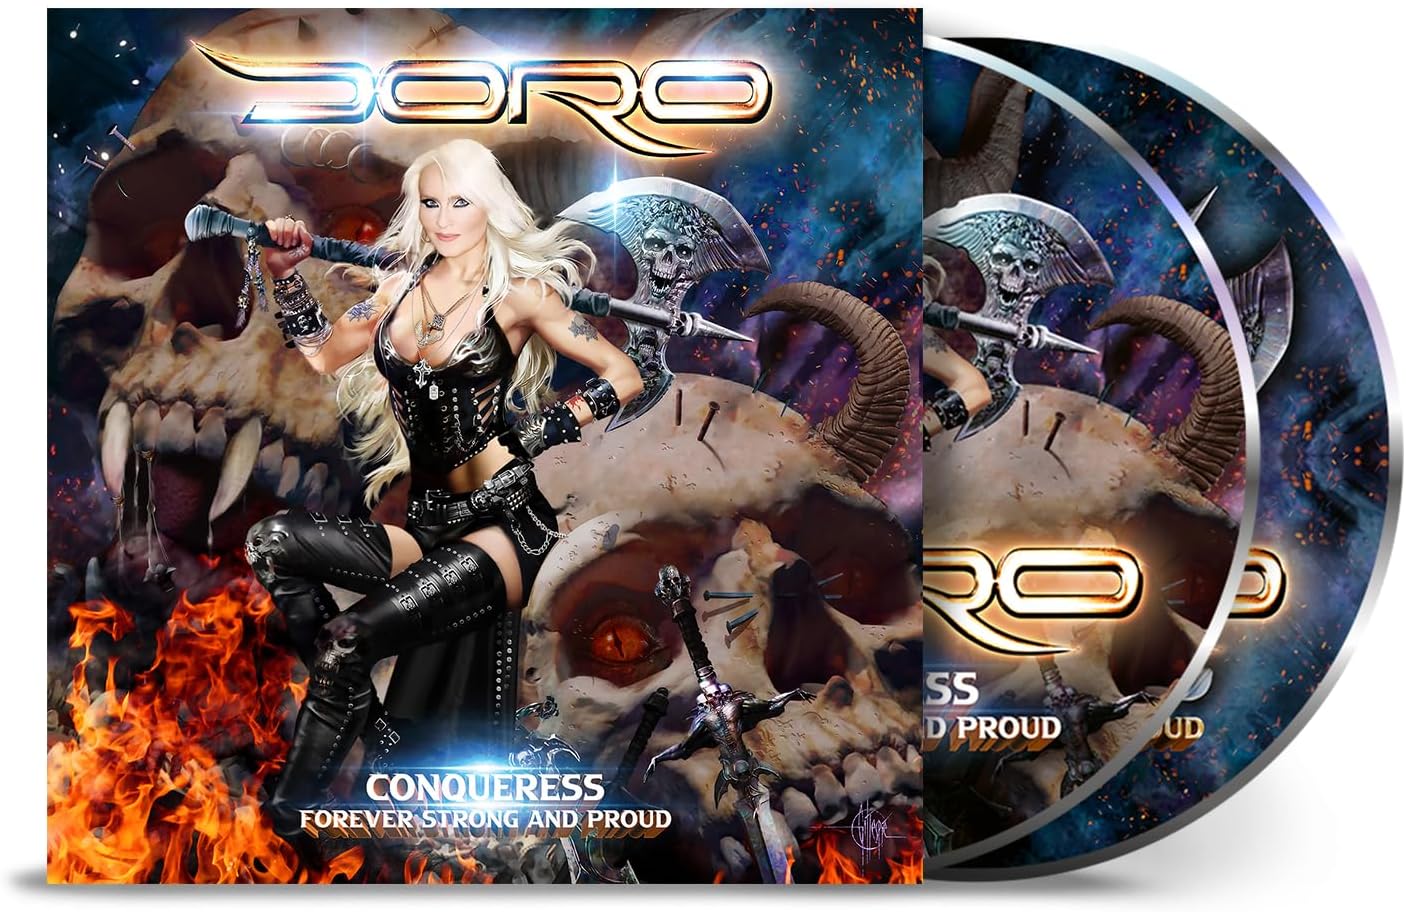 Conqueress: Forever Strong And Proud (Deluxe Edition) | Doro